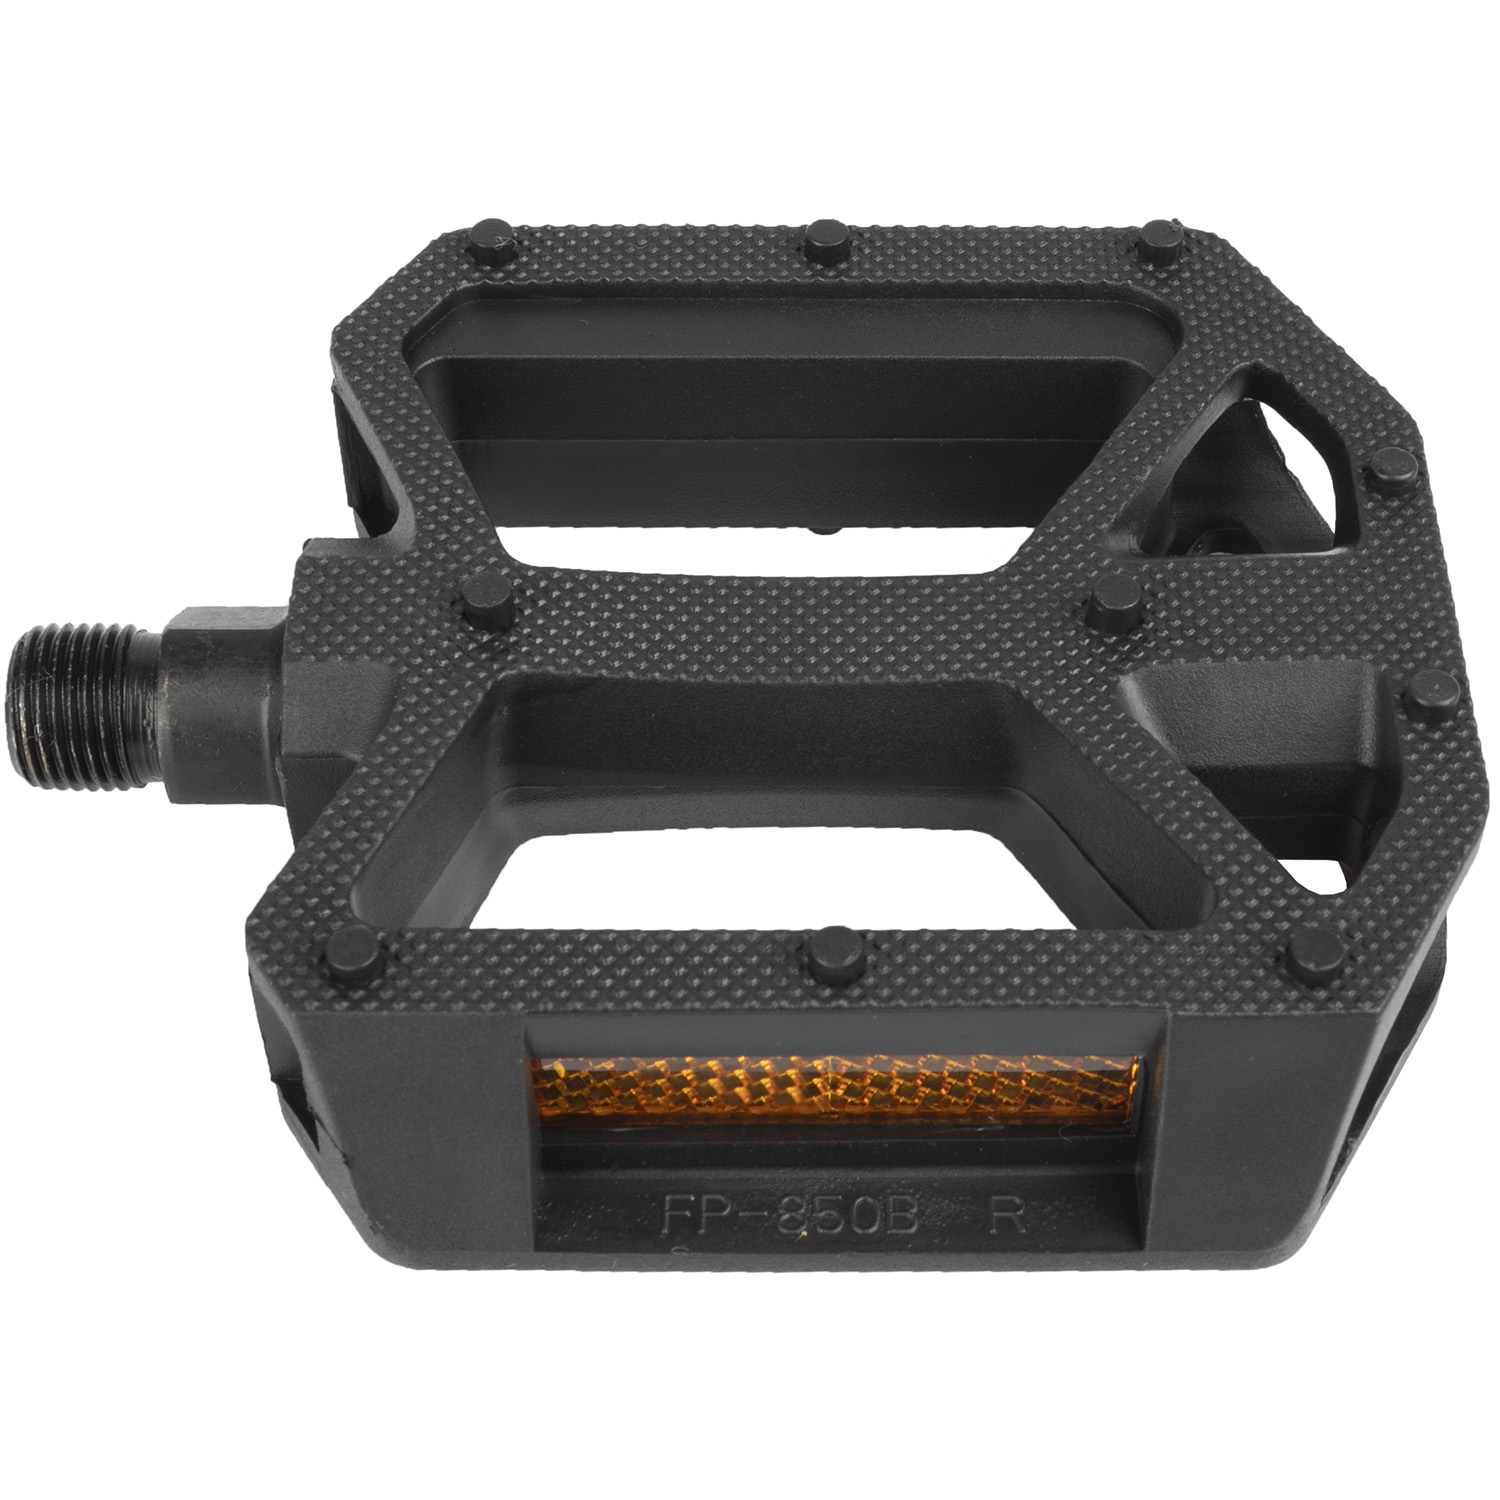 Steady K5 83×92 flat pedal – AVAILABLE IN SELECTED BIKE SHOPS